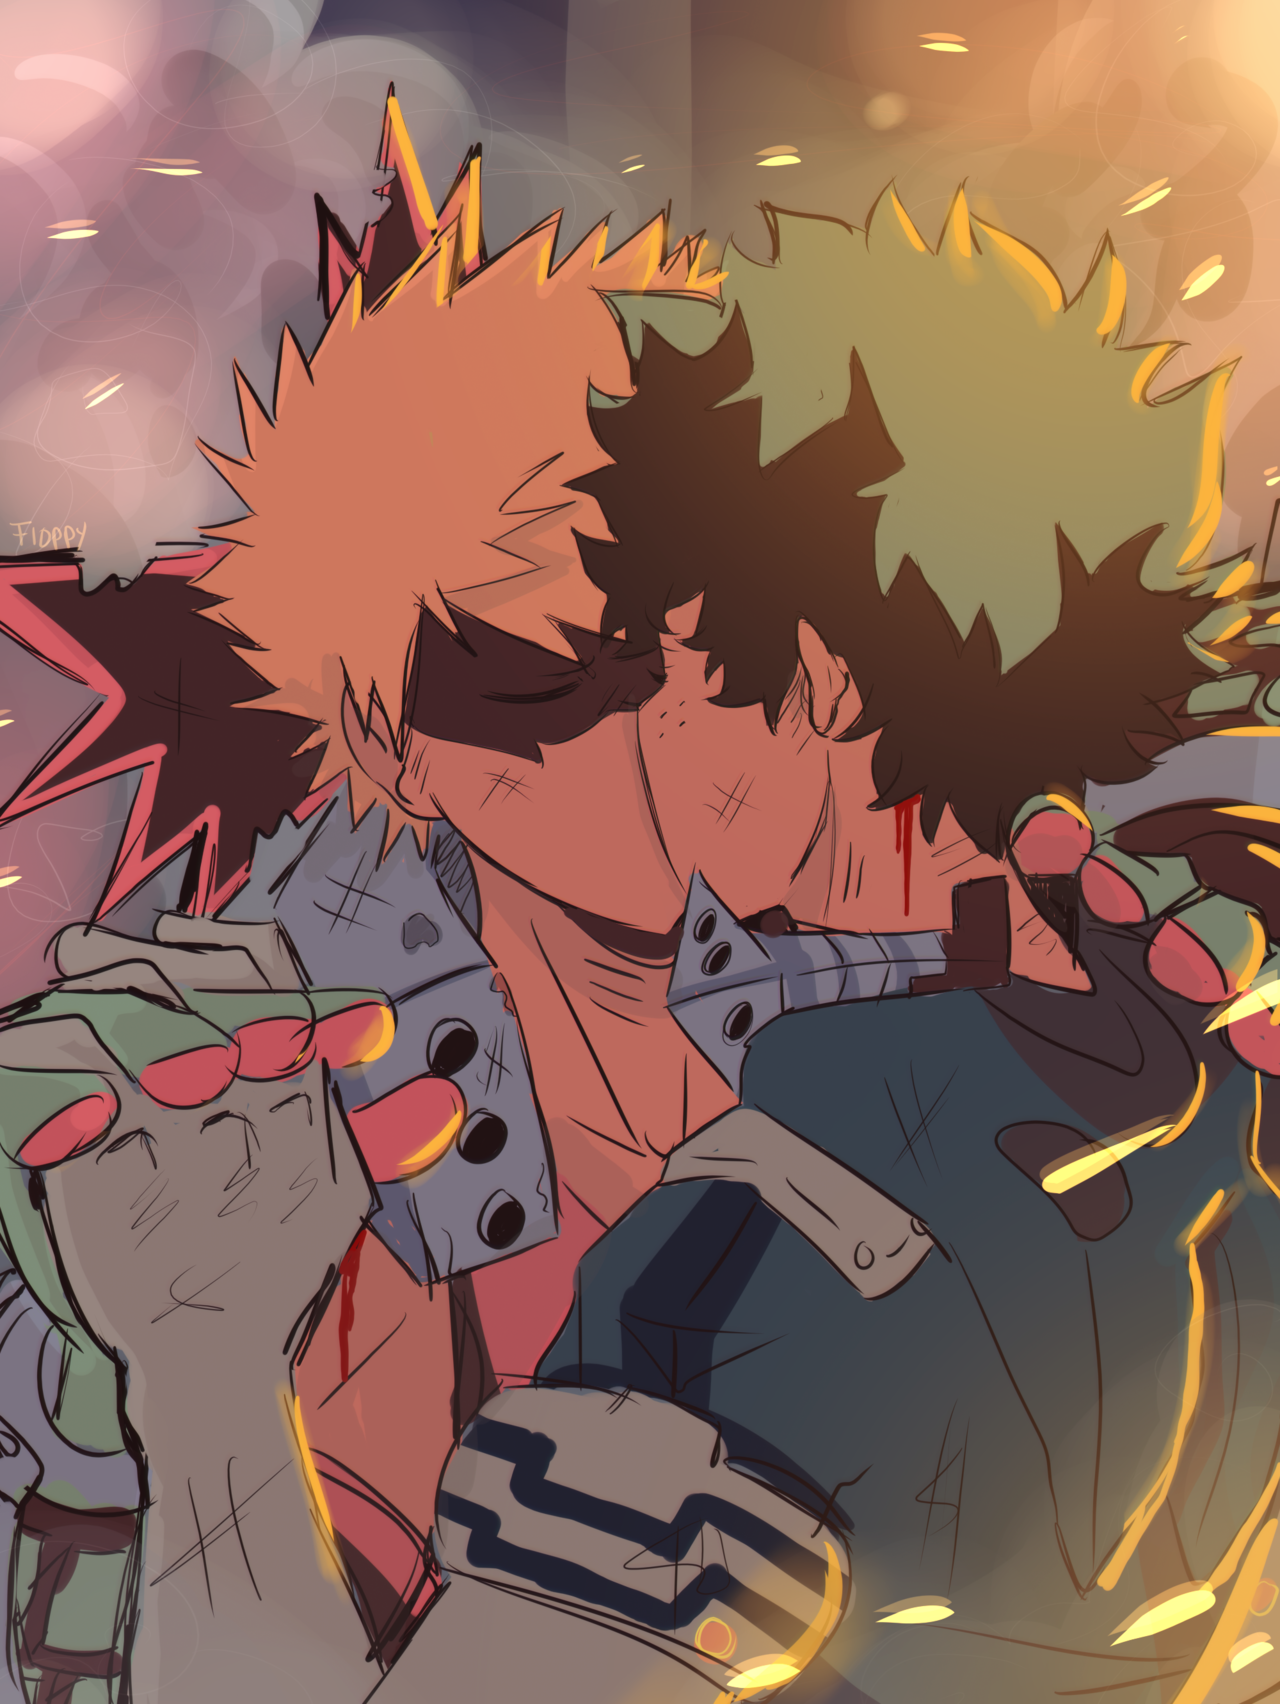 DENKI DAY on Twitter bkdk wallpapers a thread hopefully they fit  yalls phone screen i tried my best httpstco9G1cY0BJyV  Twitter